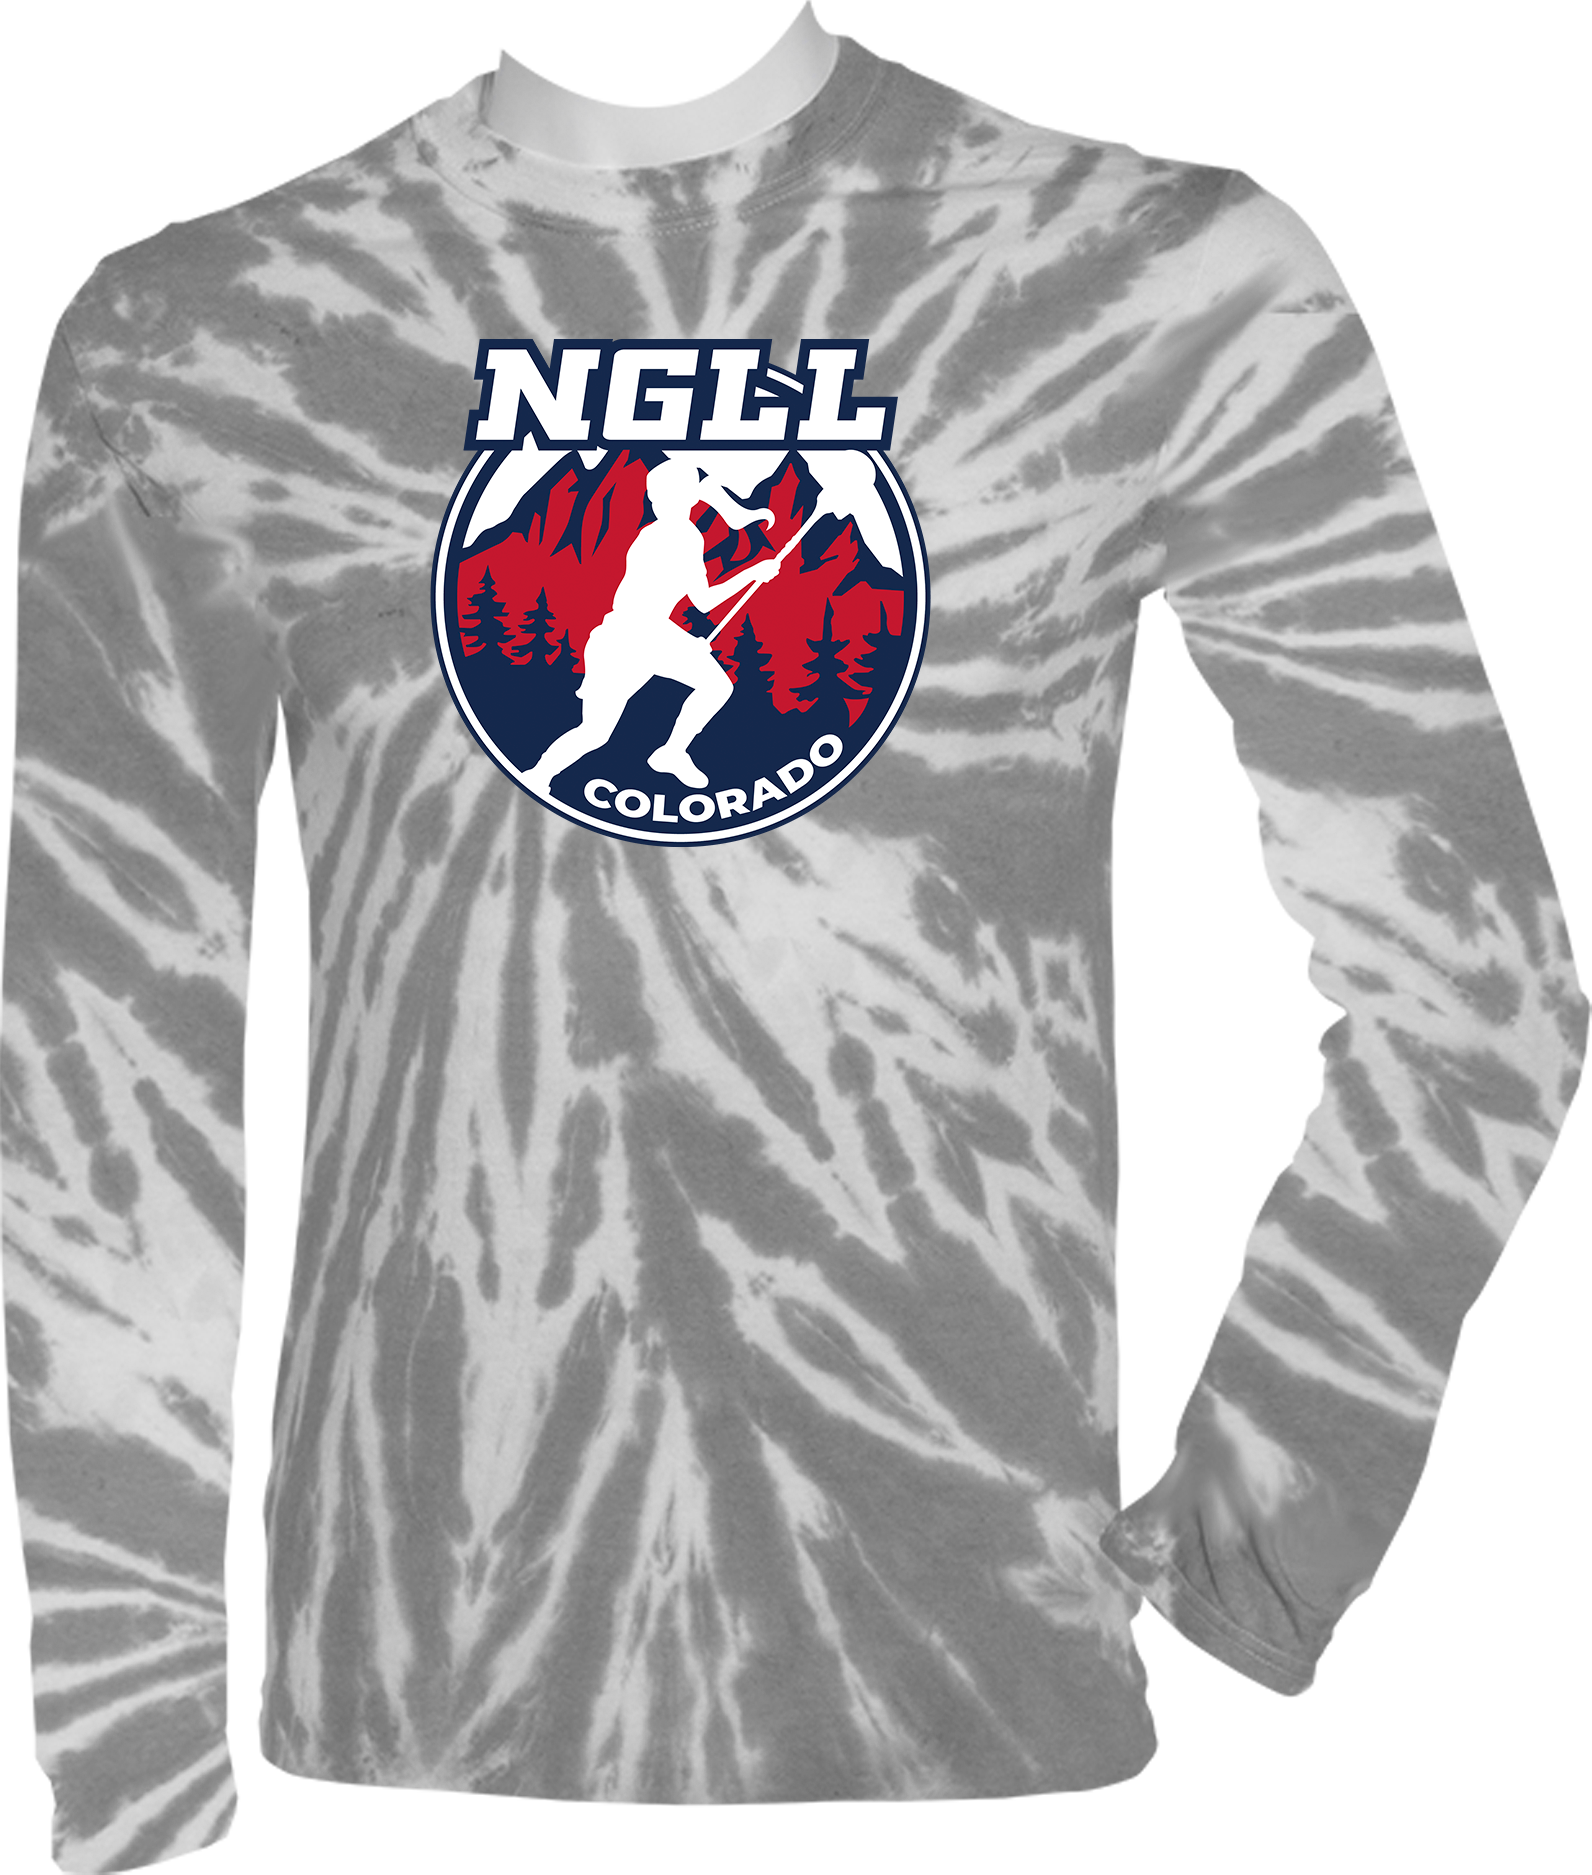 TIE-DYE LONG SLEEVES - 2023 NGLL Rocky Mountain